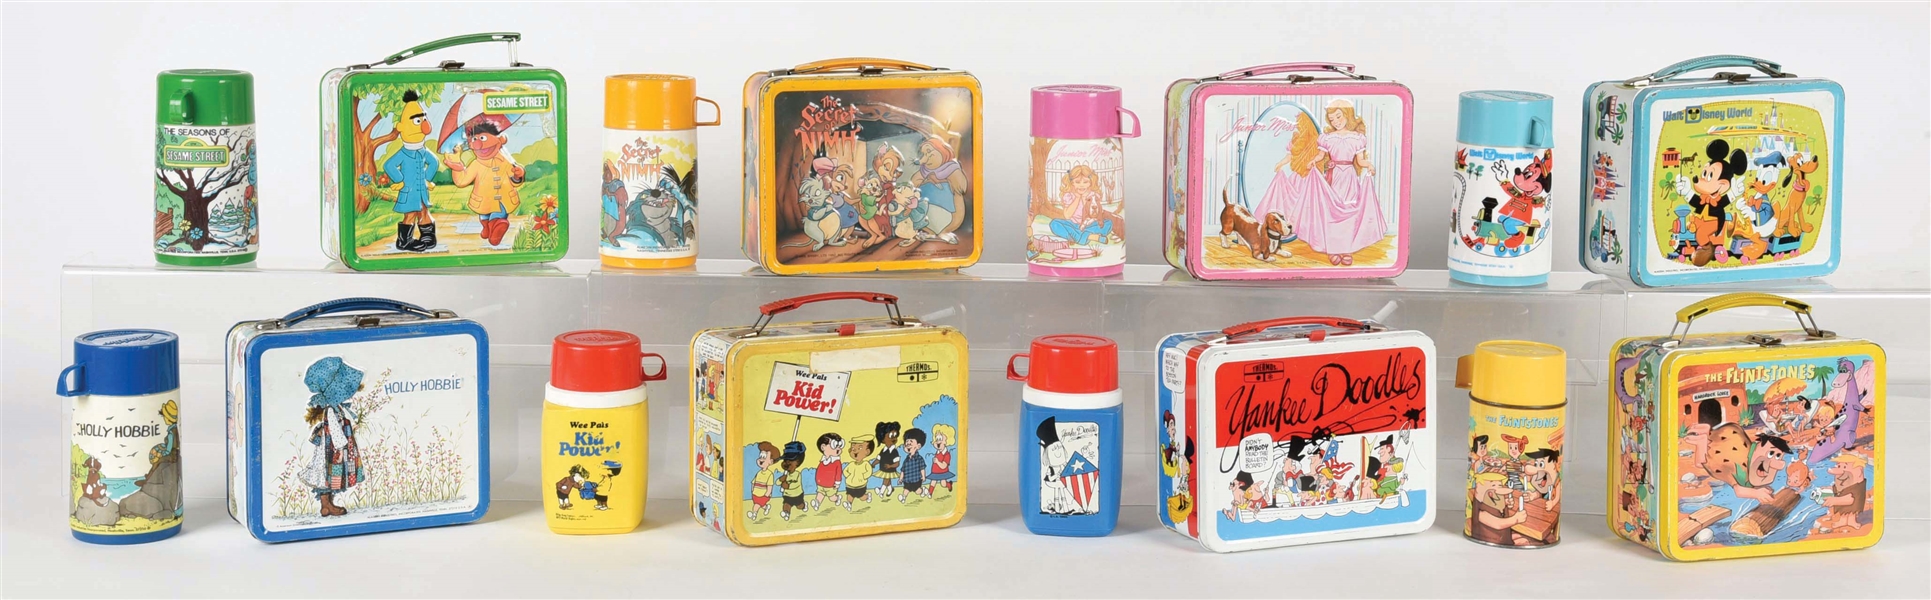 LOT OF 16: 8 VINTAGE TIN LITHO LUNCHBOXES WITH 8 MATCHING THERMOSES.